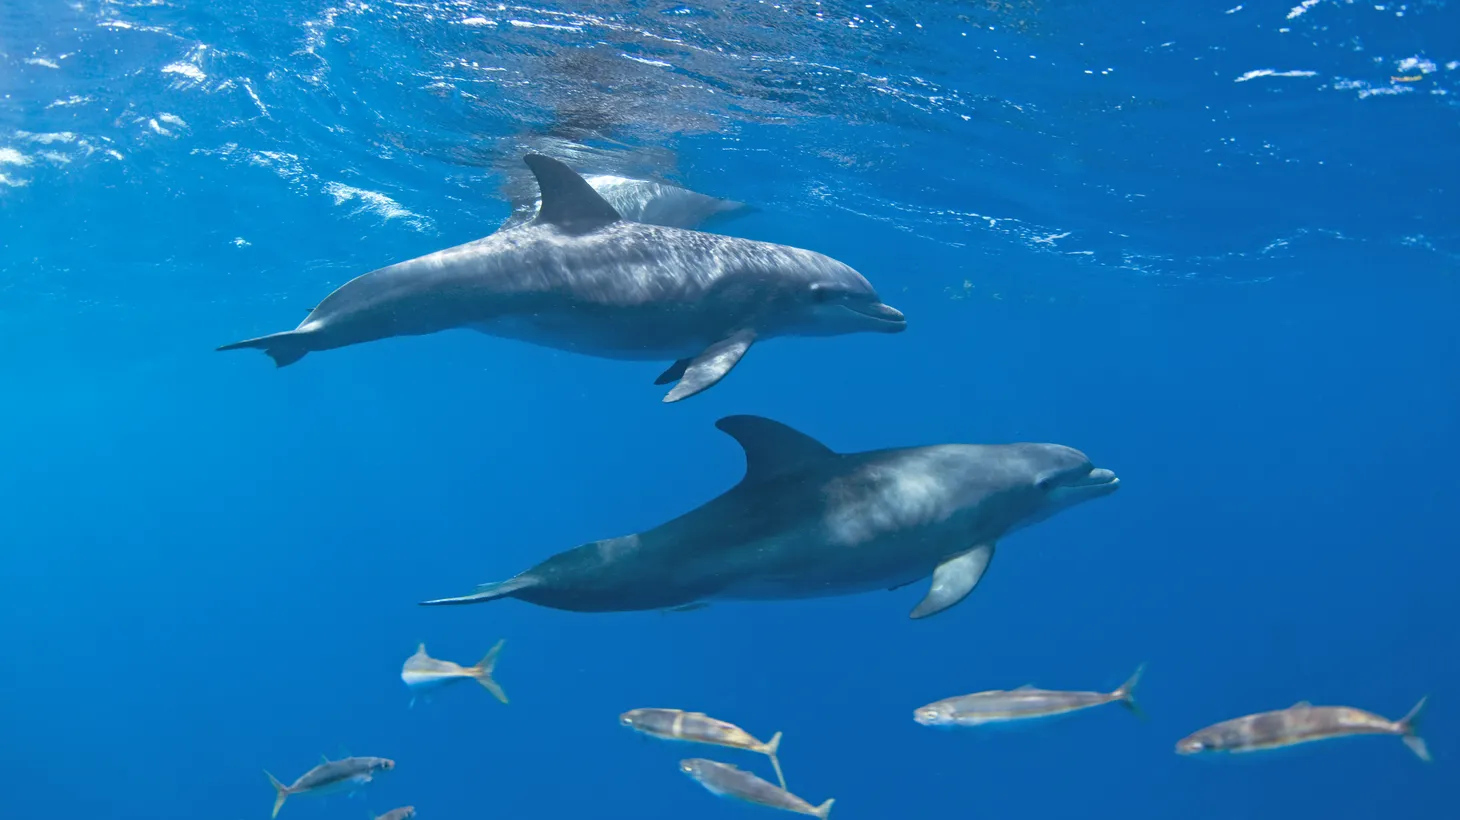 Dolphins navigate murky seas using echolocation. They’re among the thousands of creatures with highly-tuned sensors that provide them with a vastly different experience of our planet.